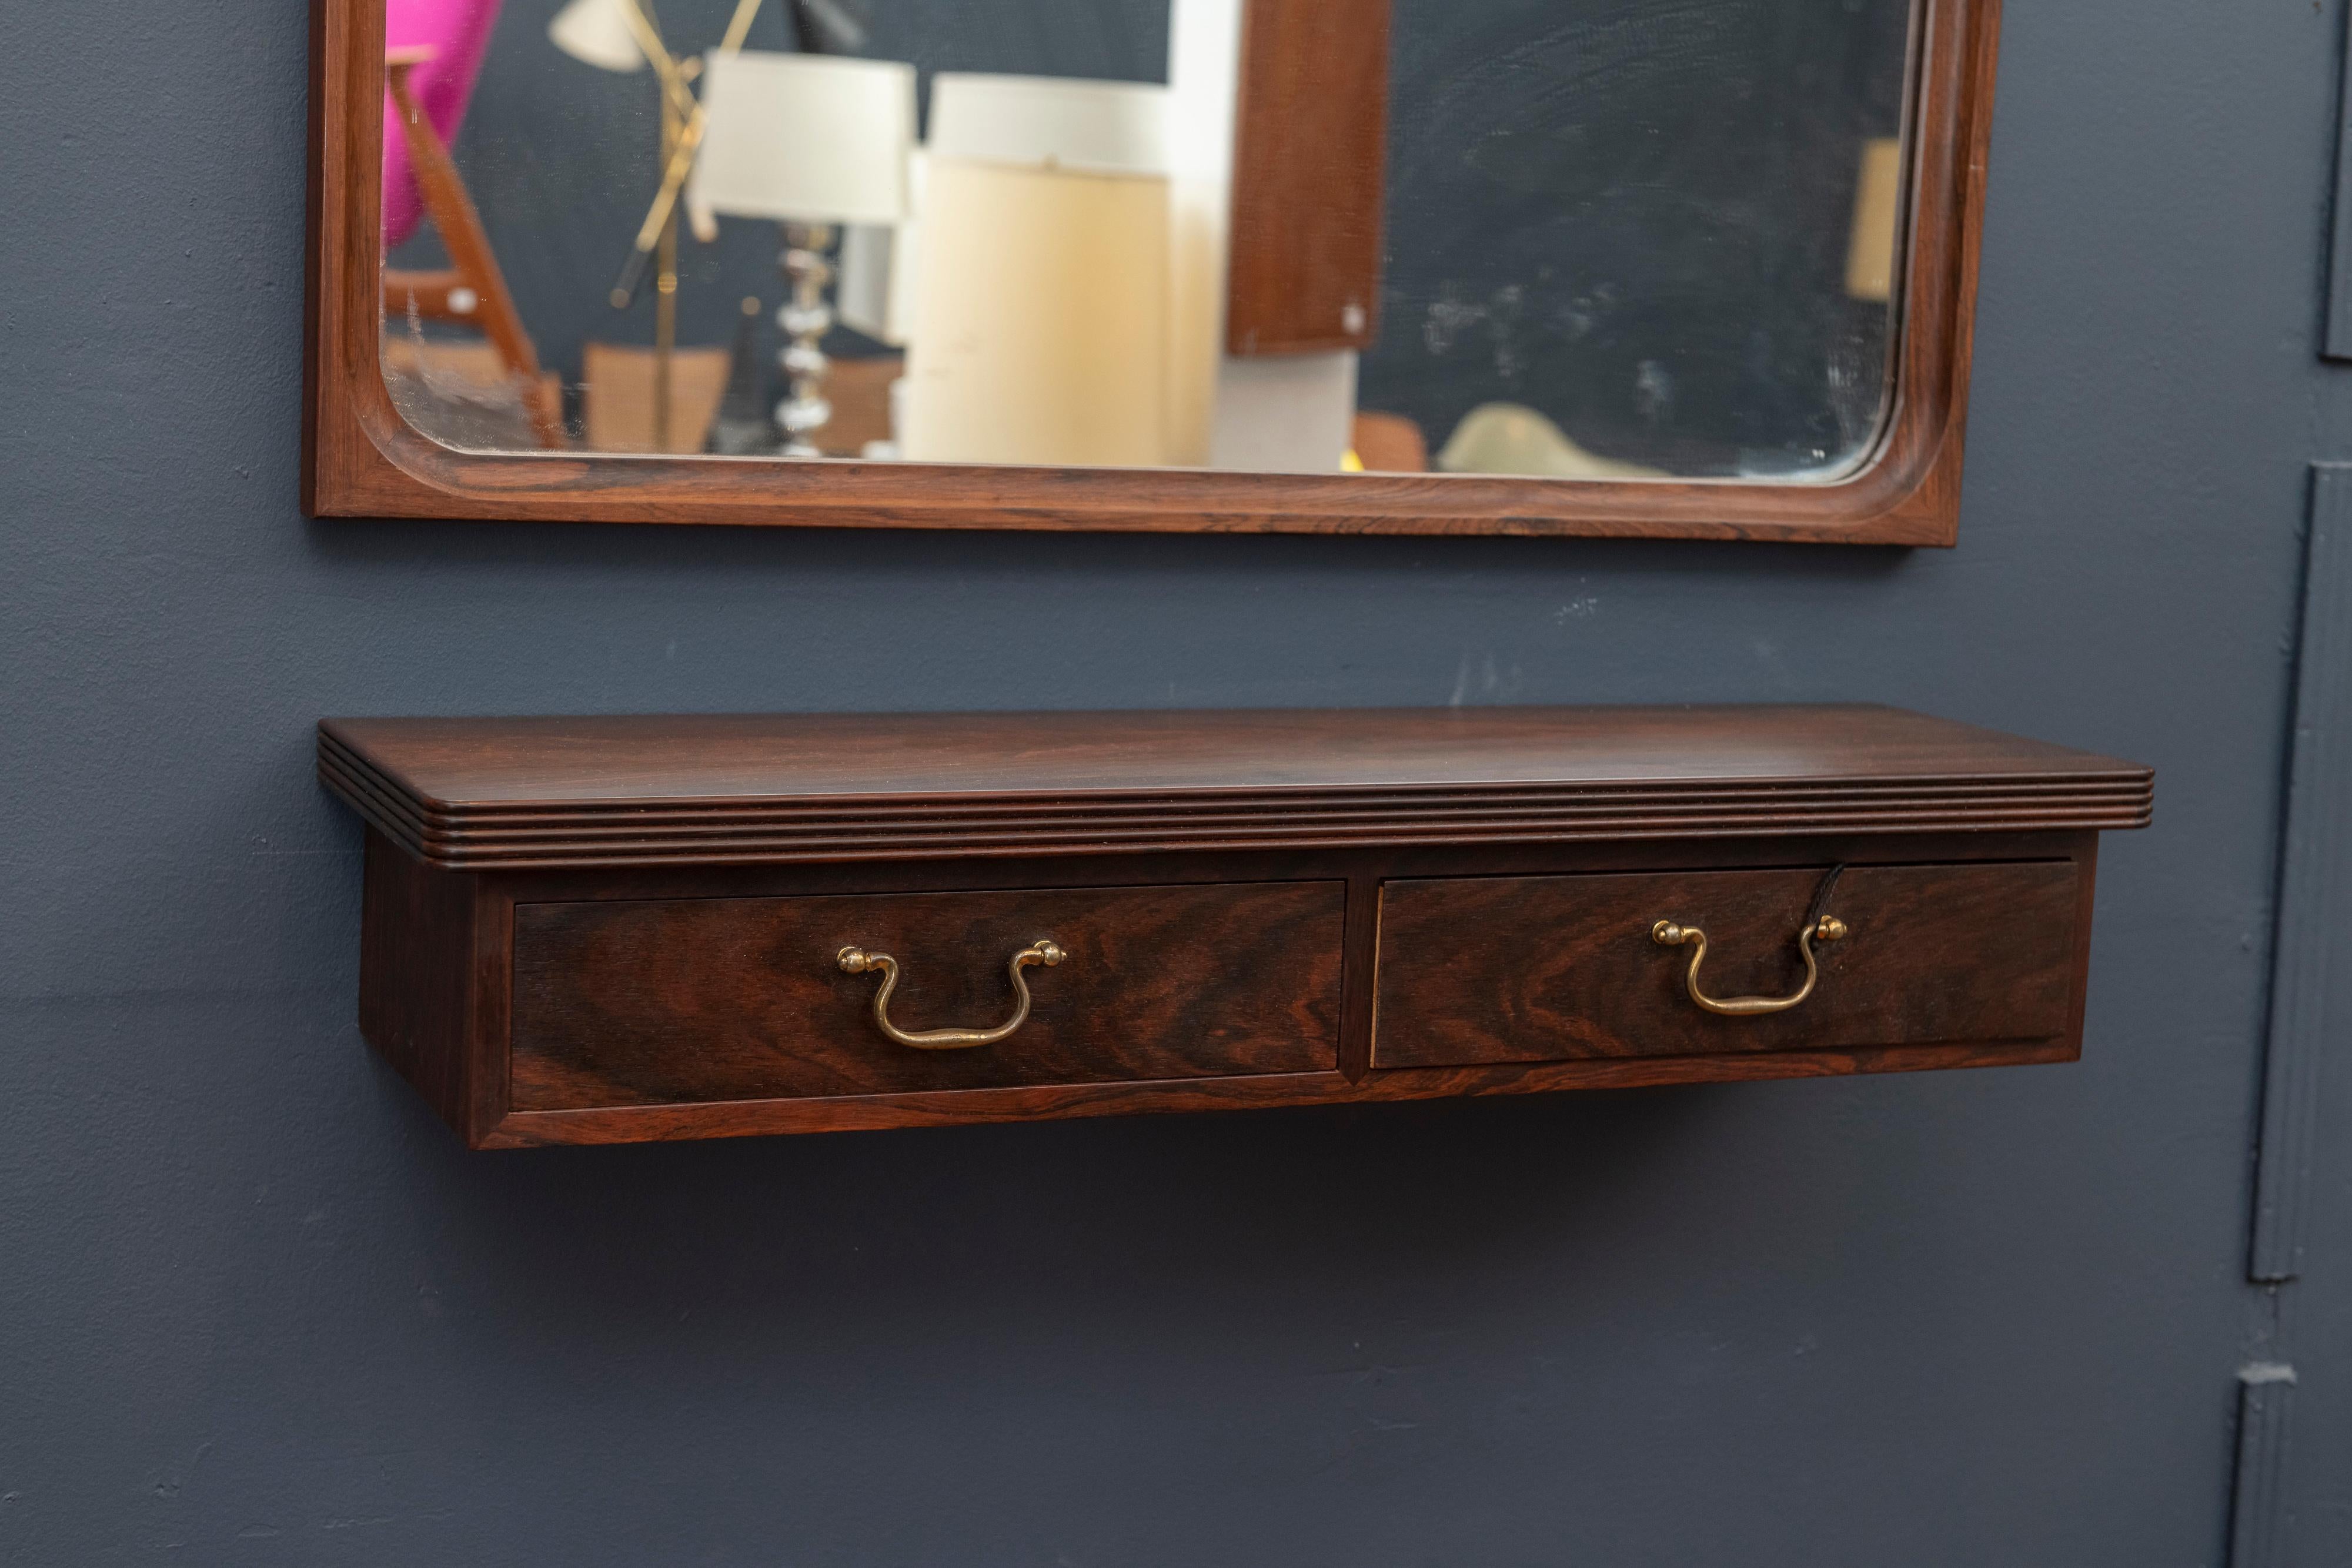 Danish rosewood console mirror with matching two-drawer shelf. Excellent quality construction and condition.